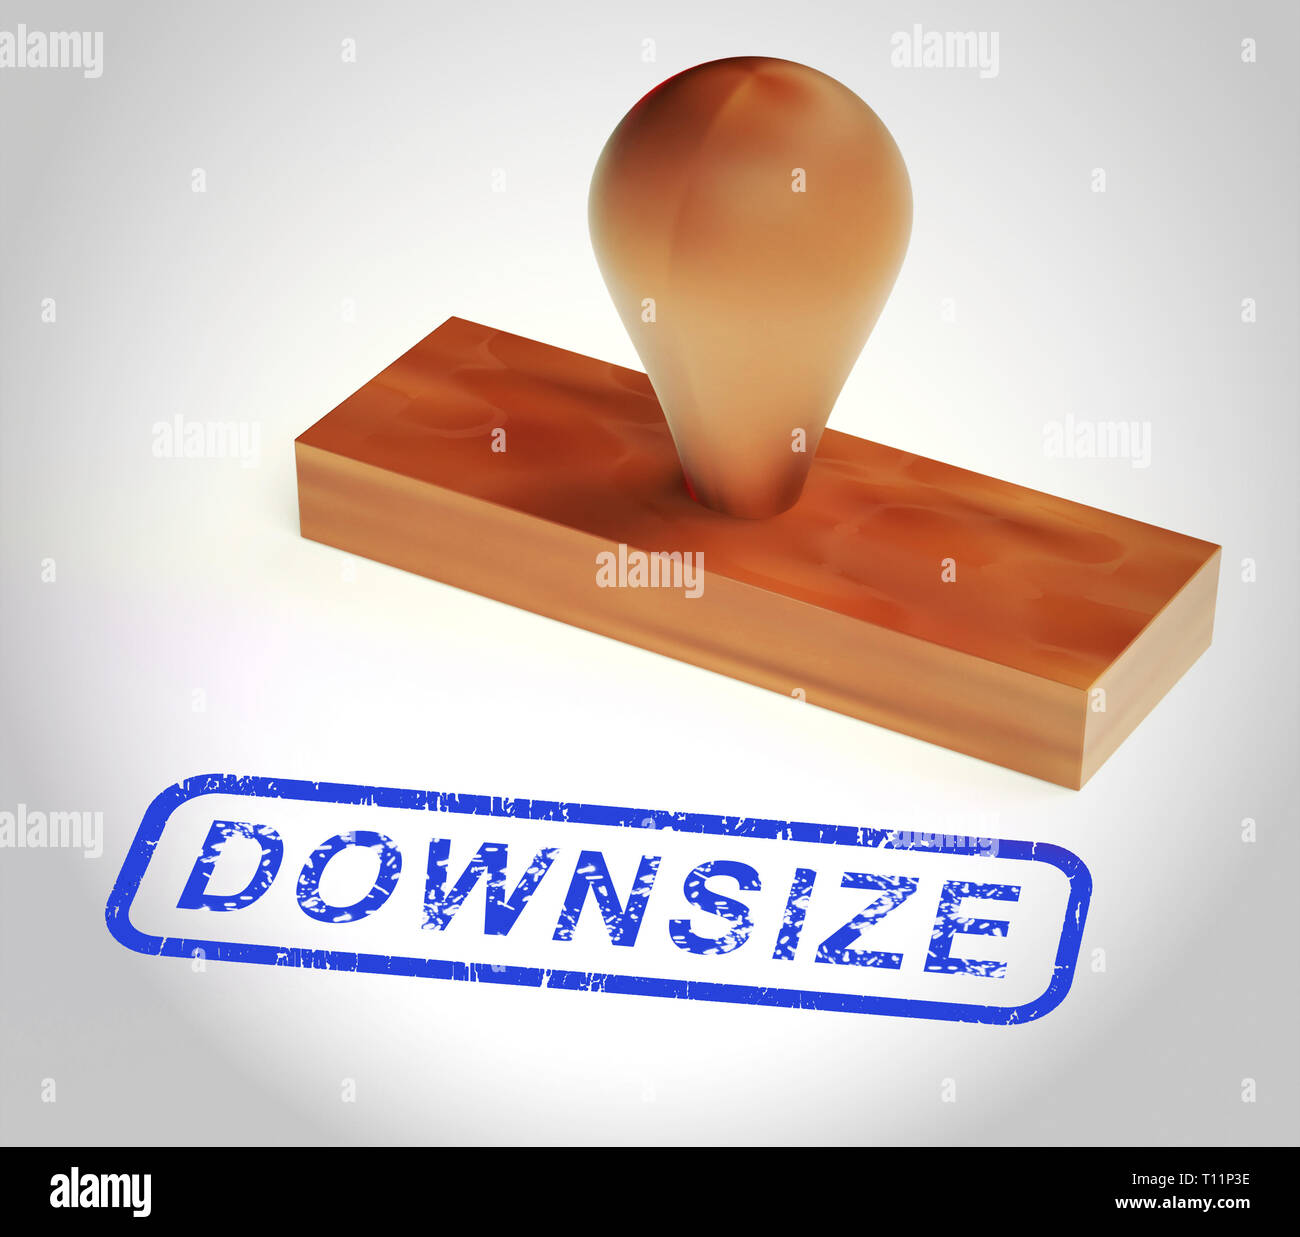 Downsize Home Stamp Means Downsizing Property Due To Retirement Or Budget. Find A Tiny House Or Apartment - 3d Illustration Stock Photo